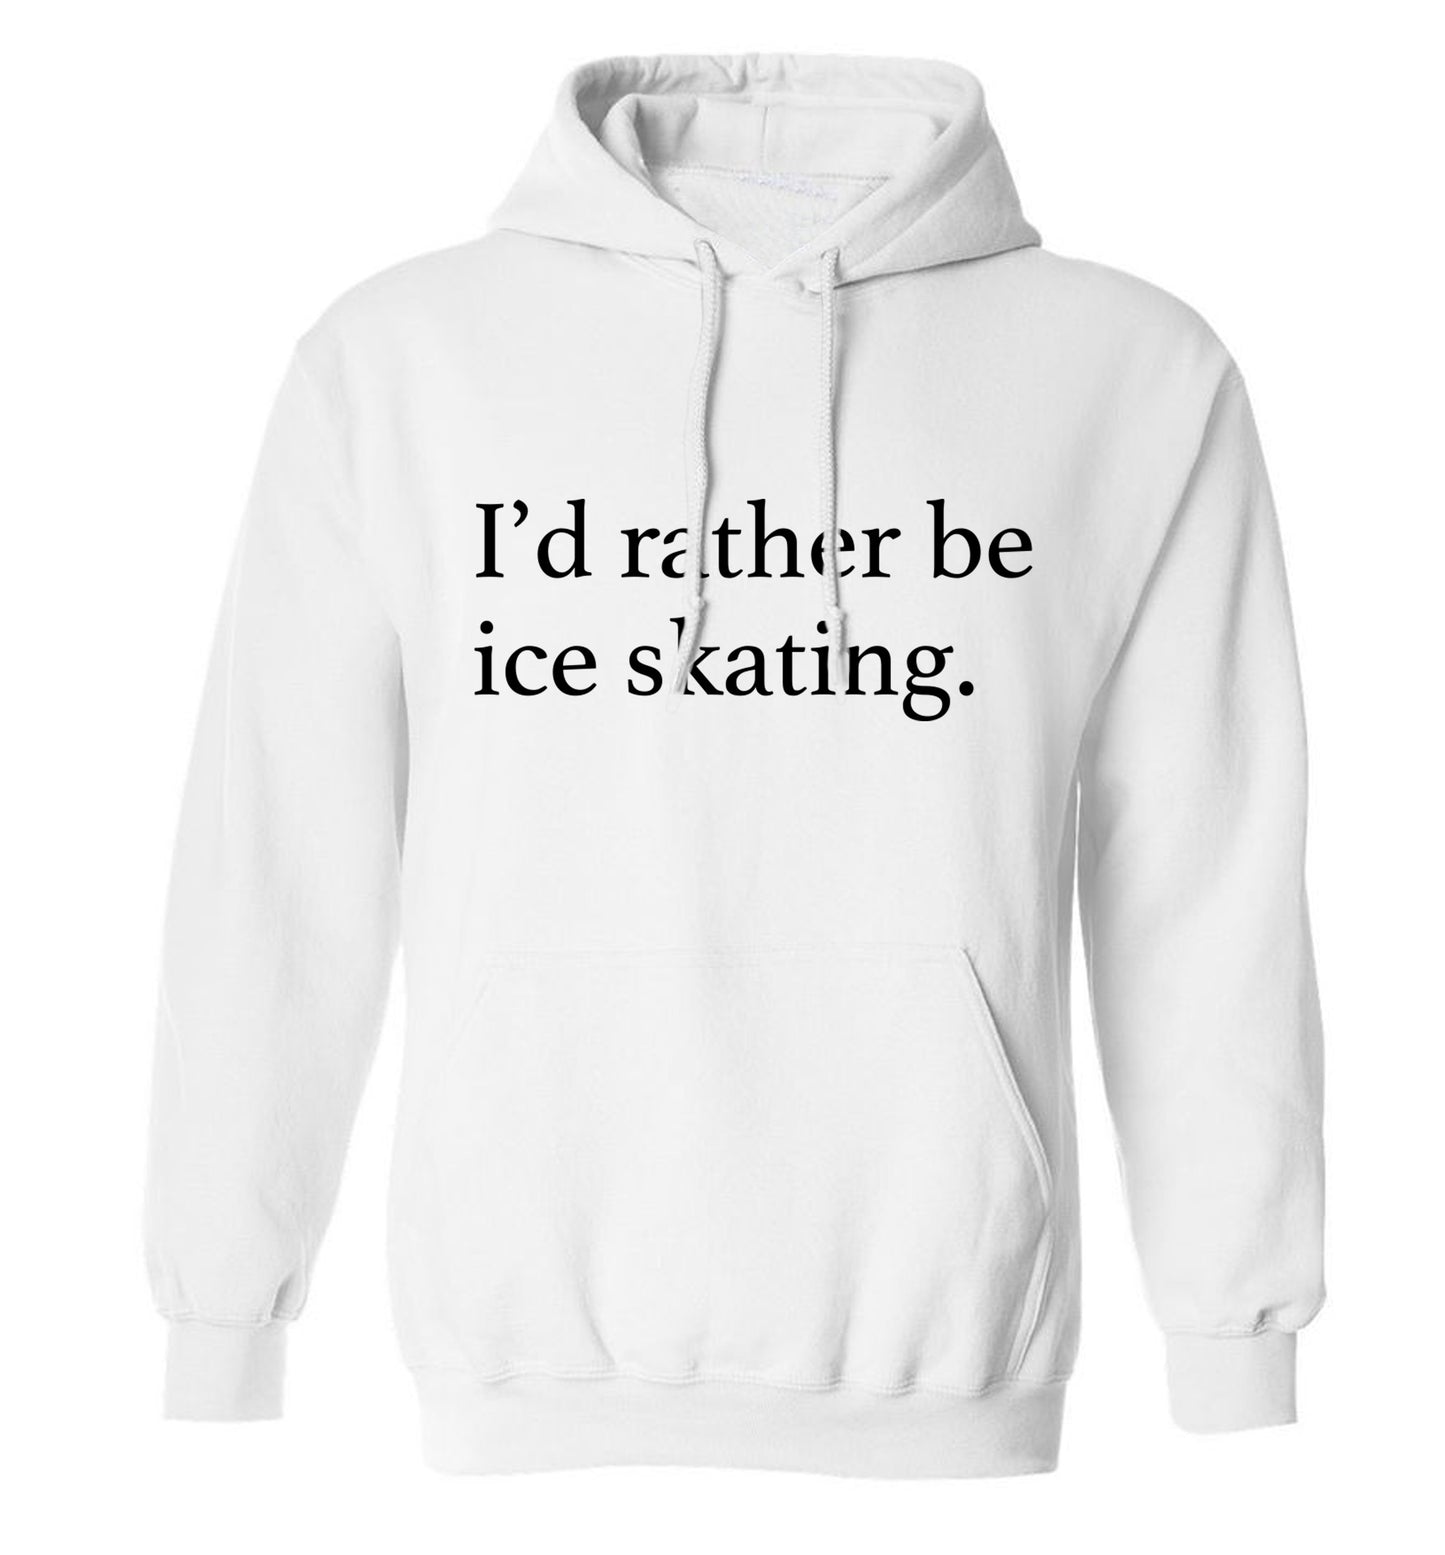 I'd rather be ice skating adults unisexwhite hoodie 2XL